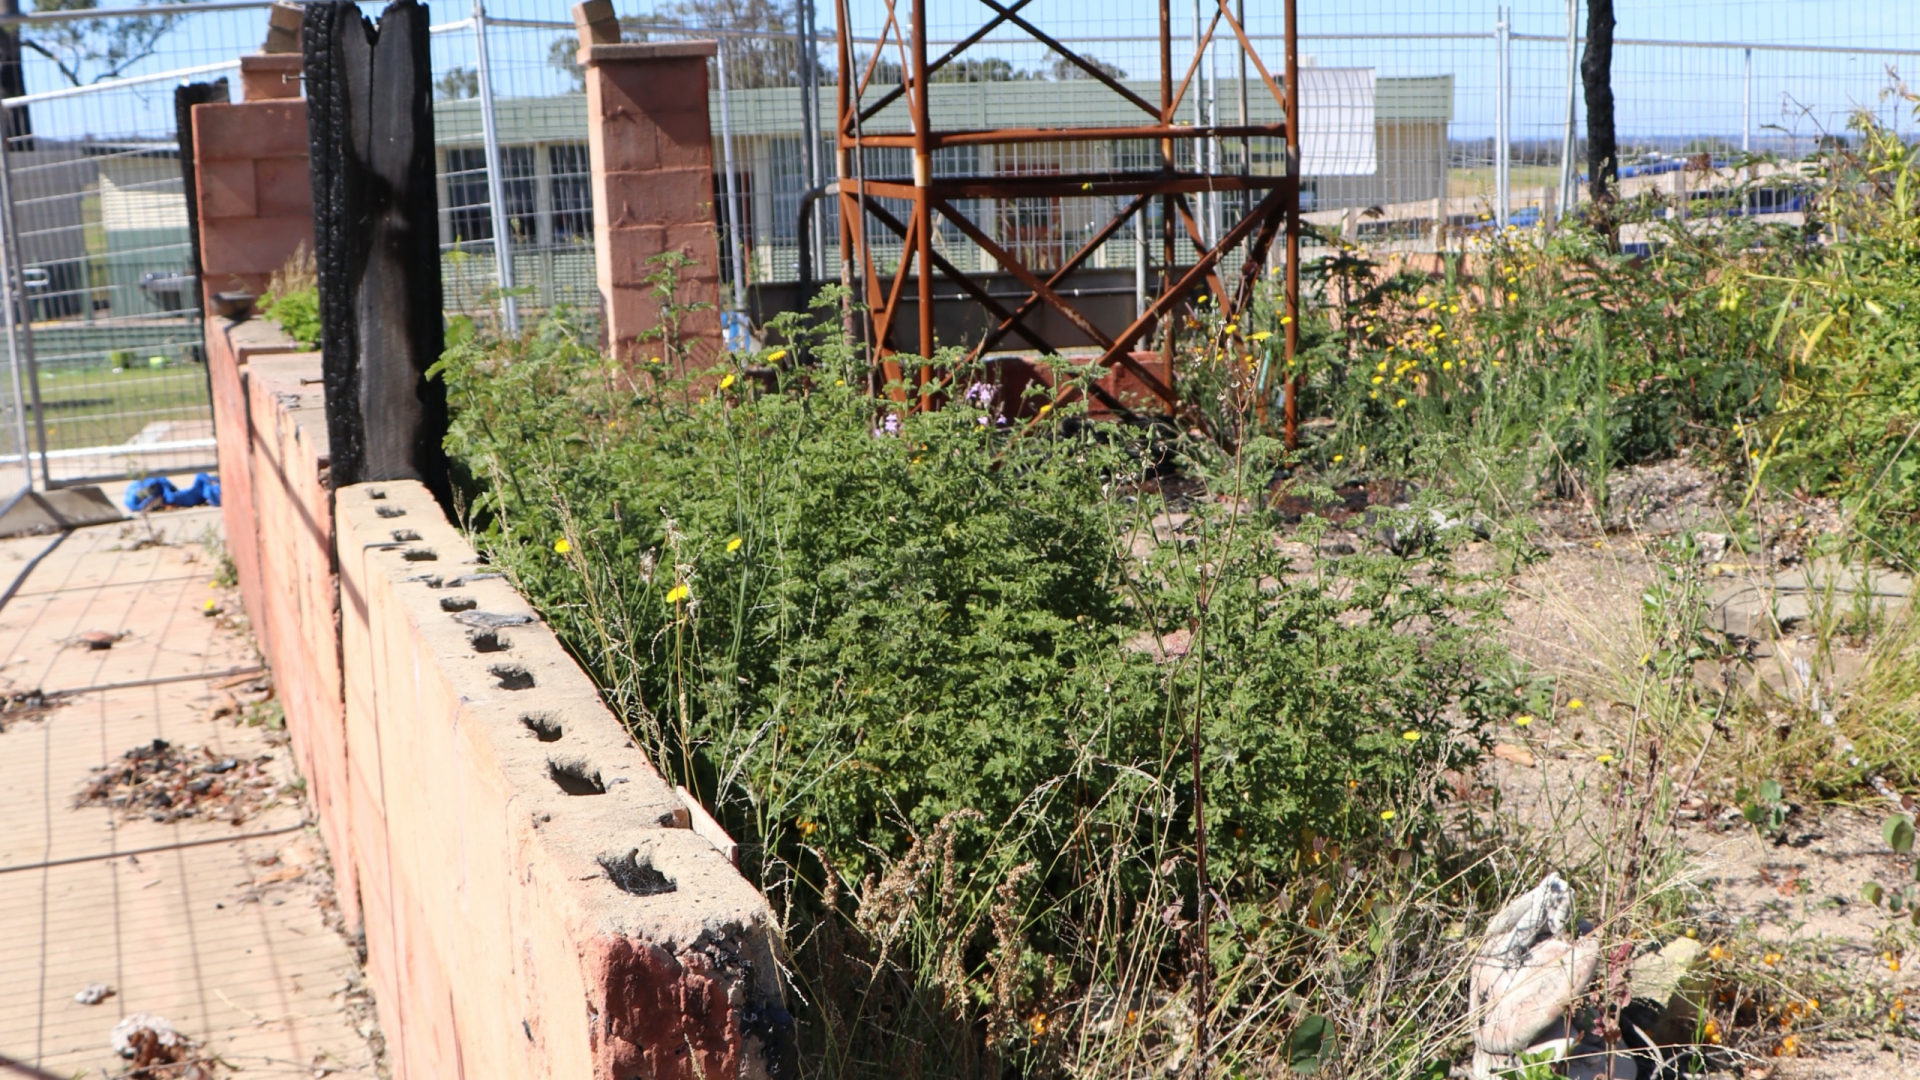 Image of an old brick wall in the foreground, some rusted red scaffolding behind it. Greenery is sprouting from the base of the wall and around the scaffolding